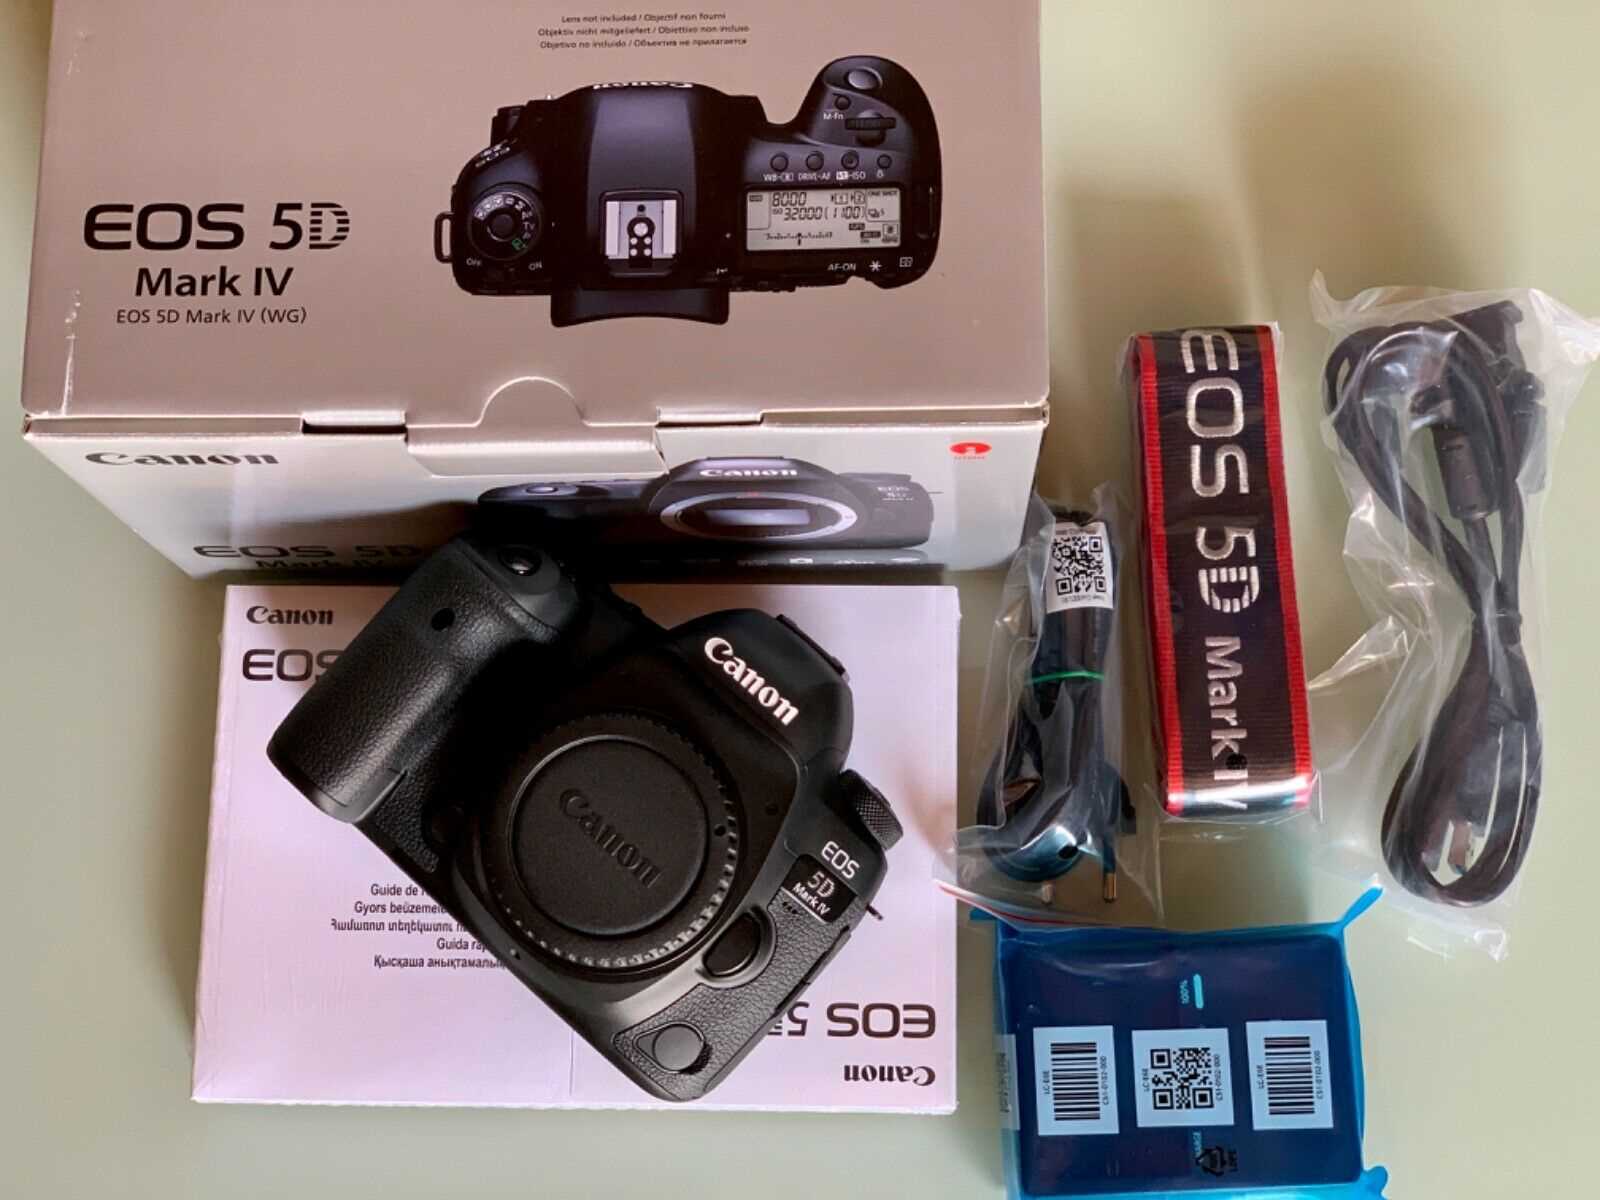 For Sale Brand New Canon EOS 5D Mark IV 30.4MP Digital SLRCamera For Just $800usd